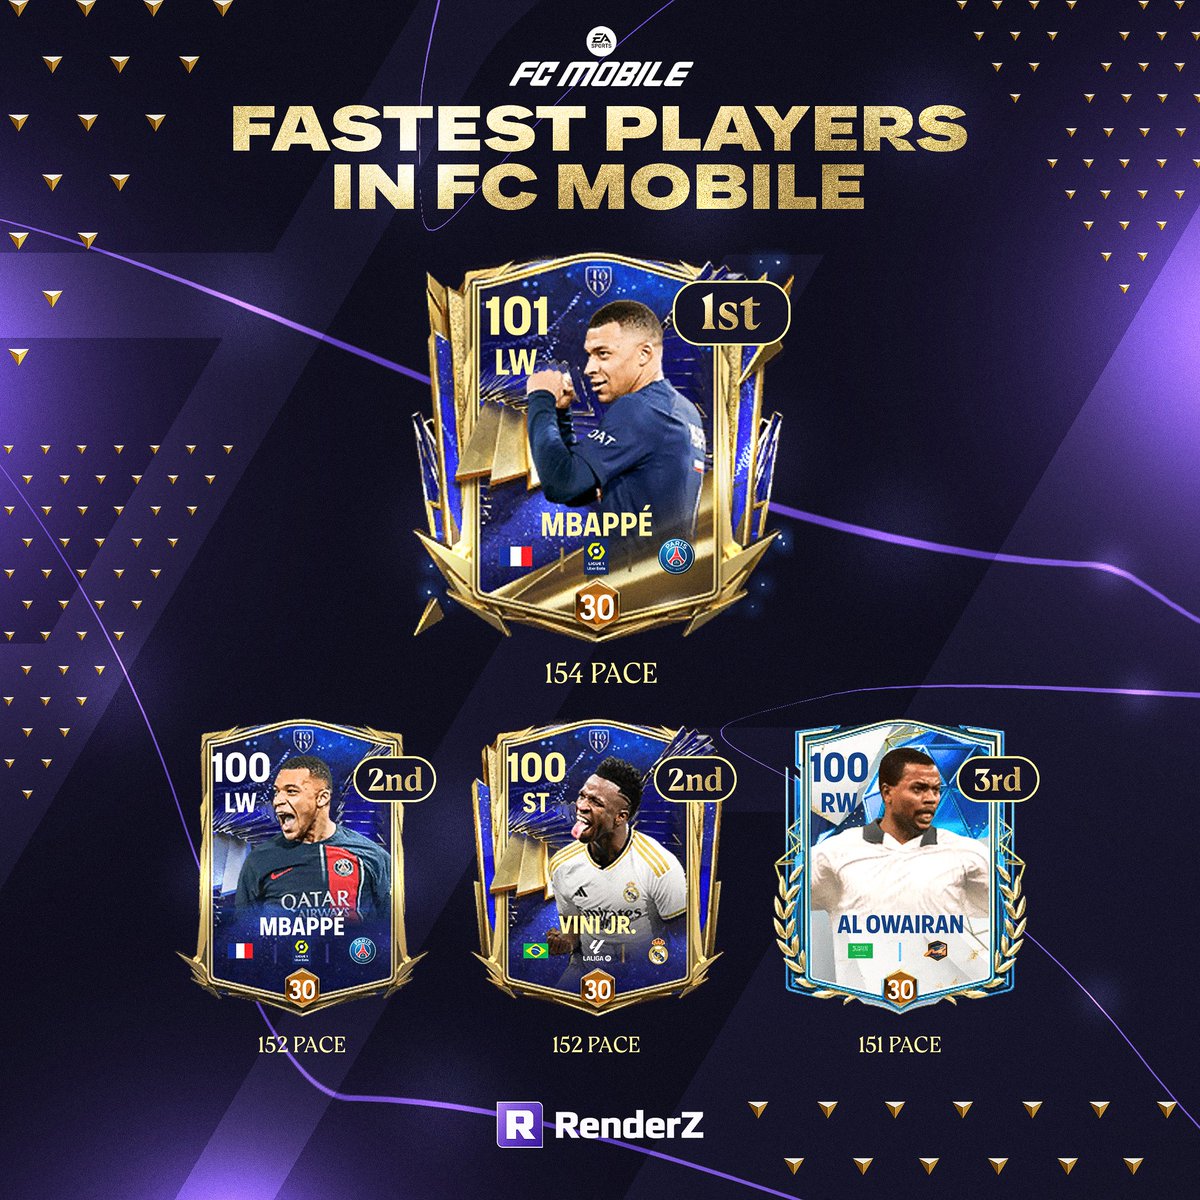 ⚡️ Fully trained and ranked, these are the fastest players in #FCMobile! 📊 Compare all the #FCMobile players now in our database with our updated filtering system! 🔗 renderz.app